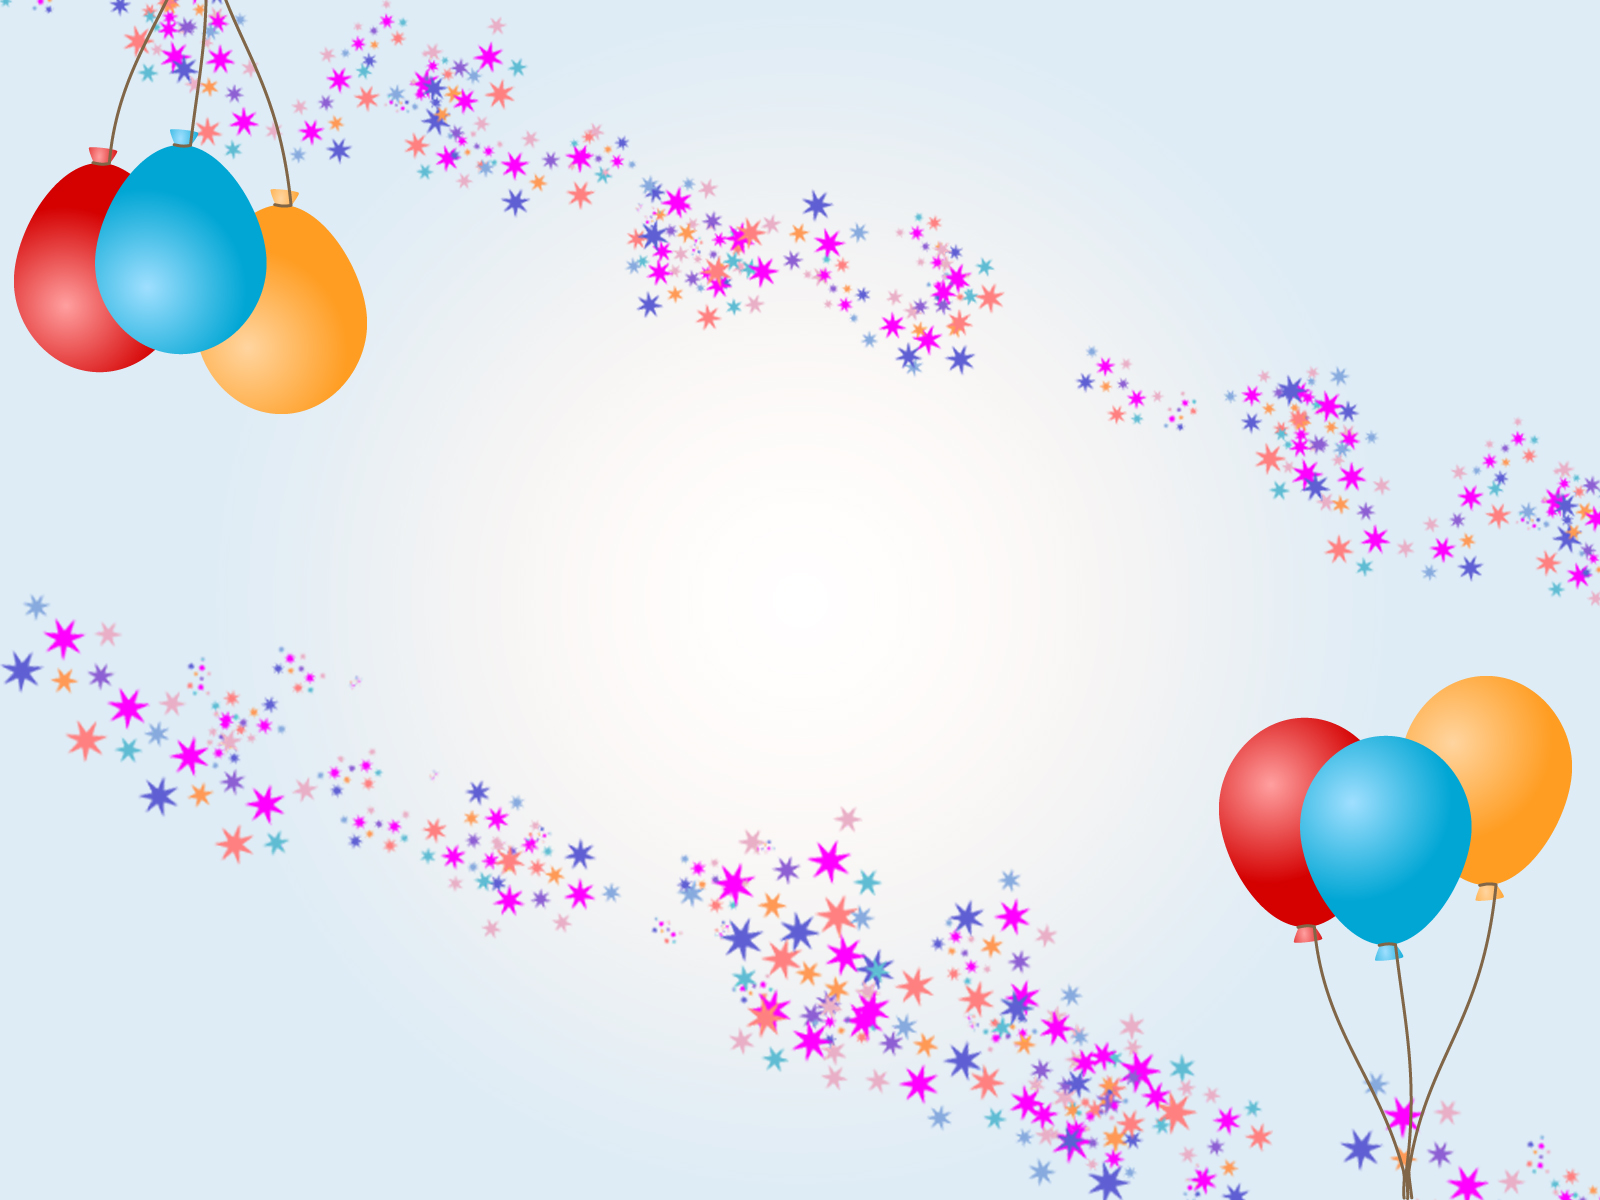 Balloons with Stars for Birthday Backgrounds | Cartoon, Holiday Templates |  Free PPT Grounds